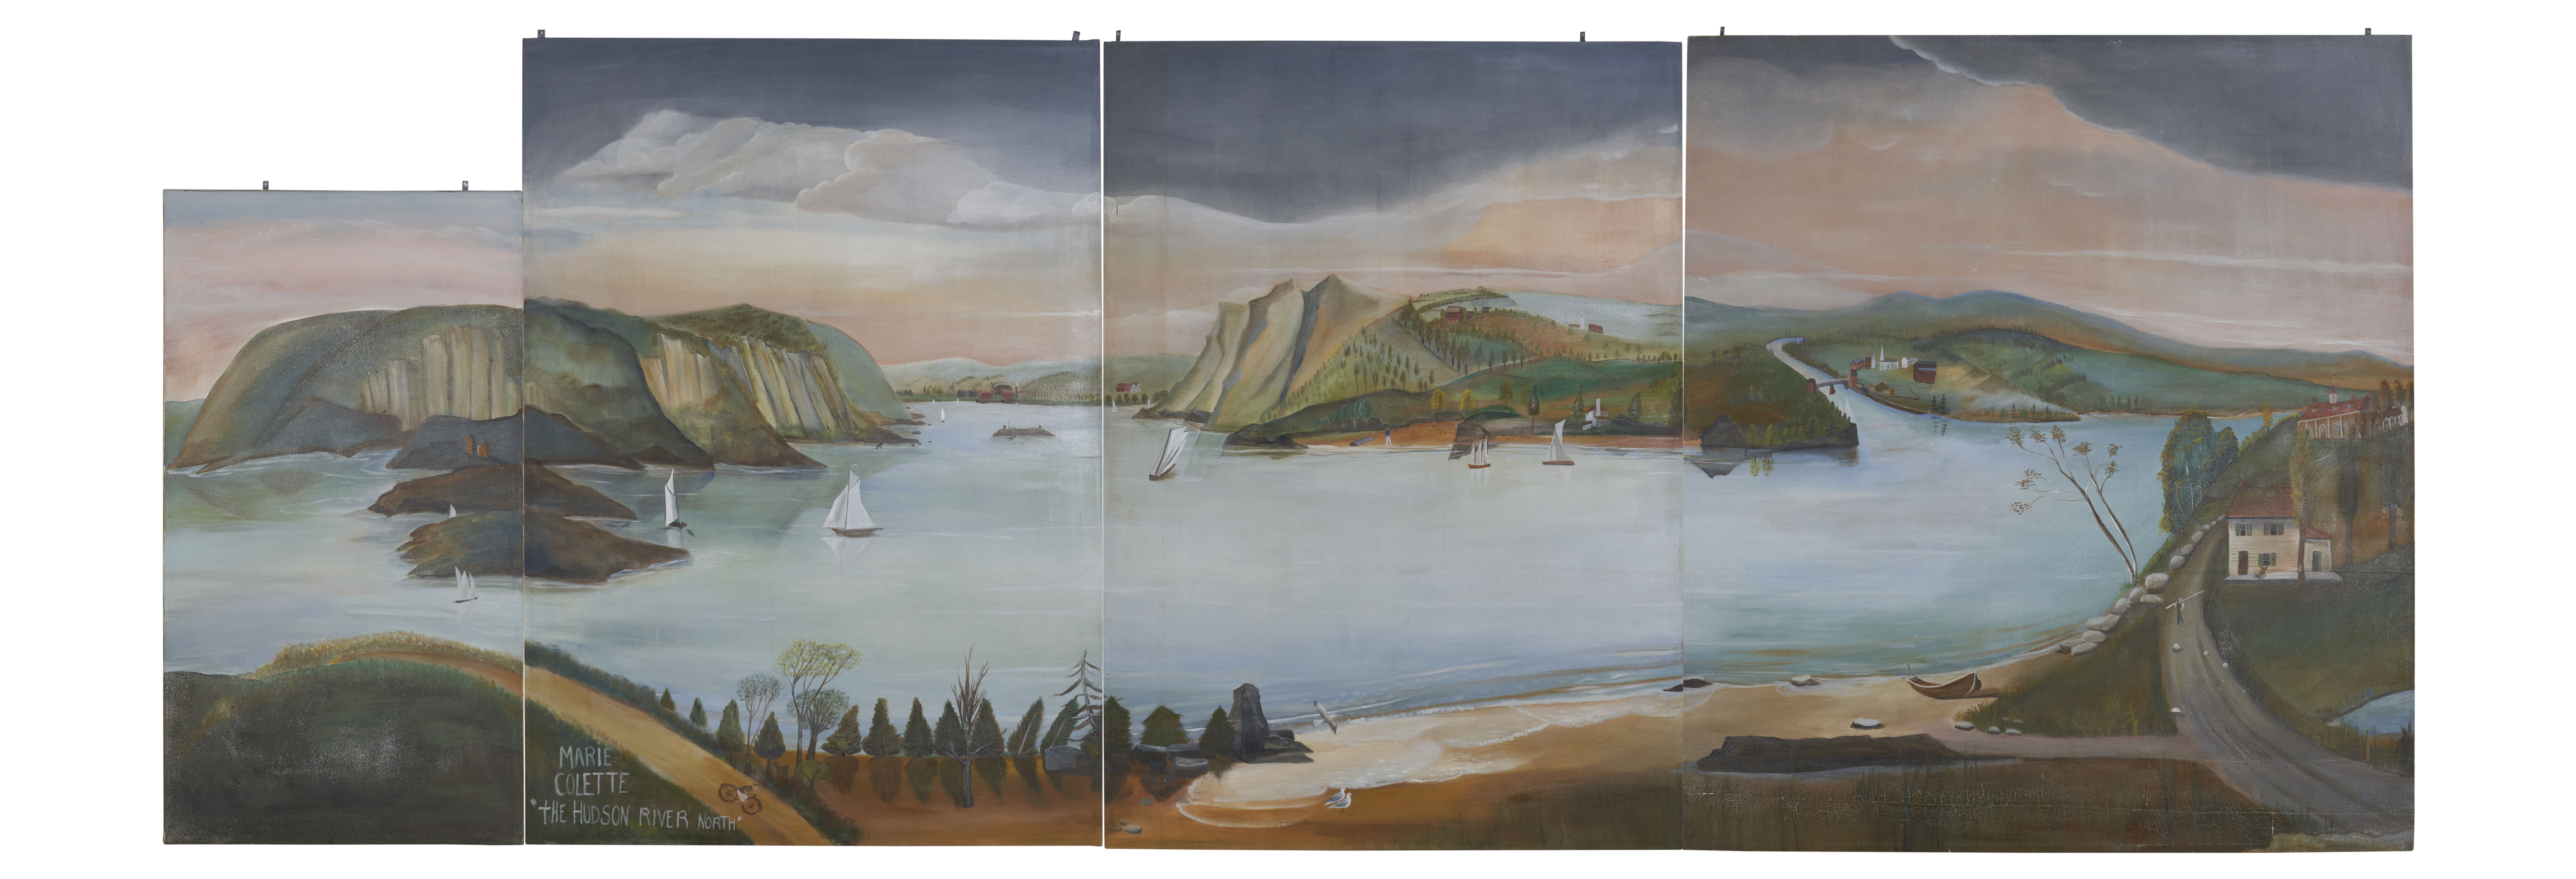 Marie Collette 4-panel mural "The